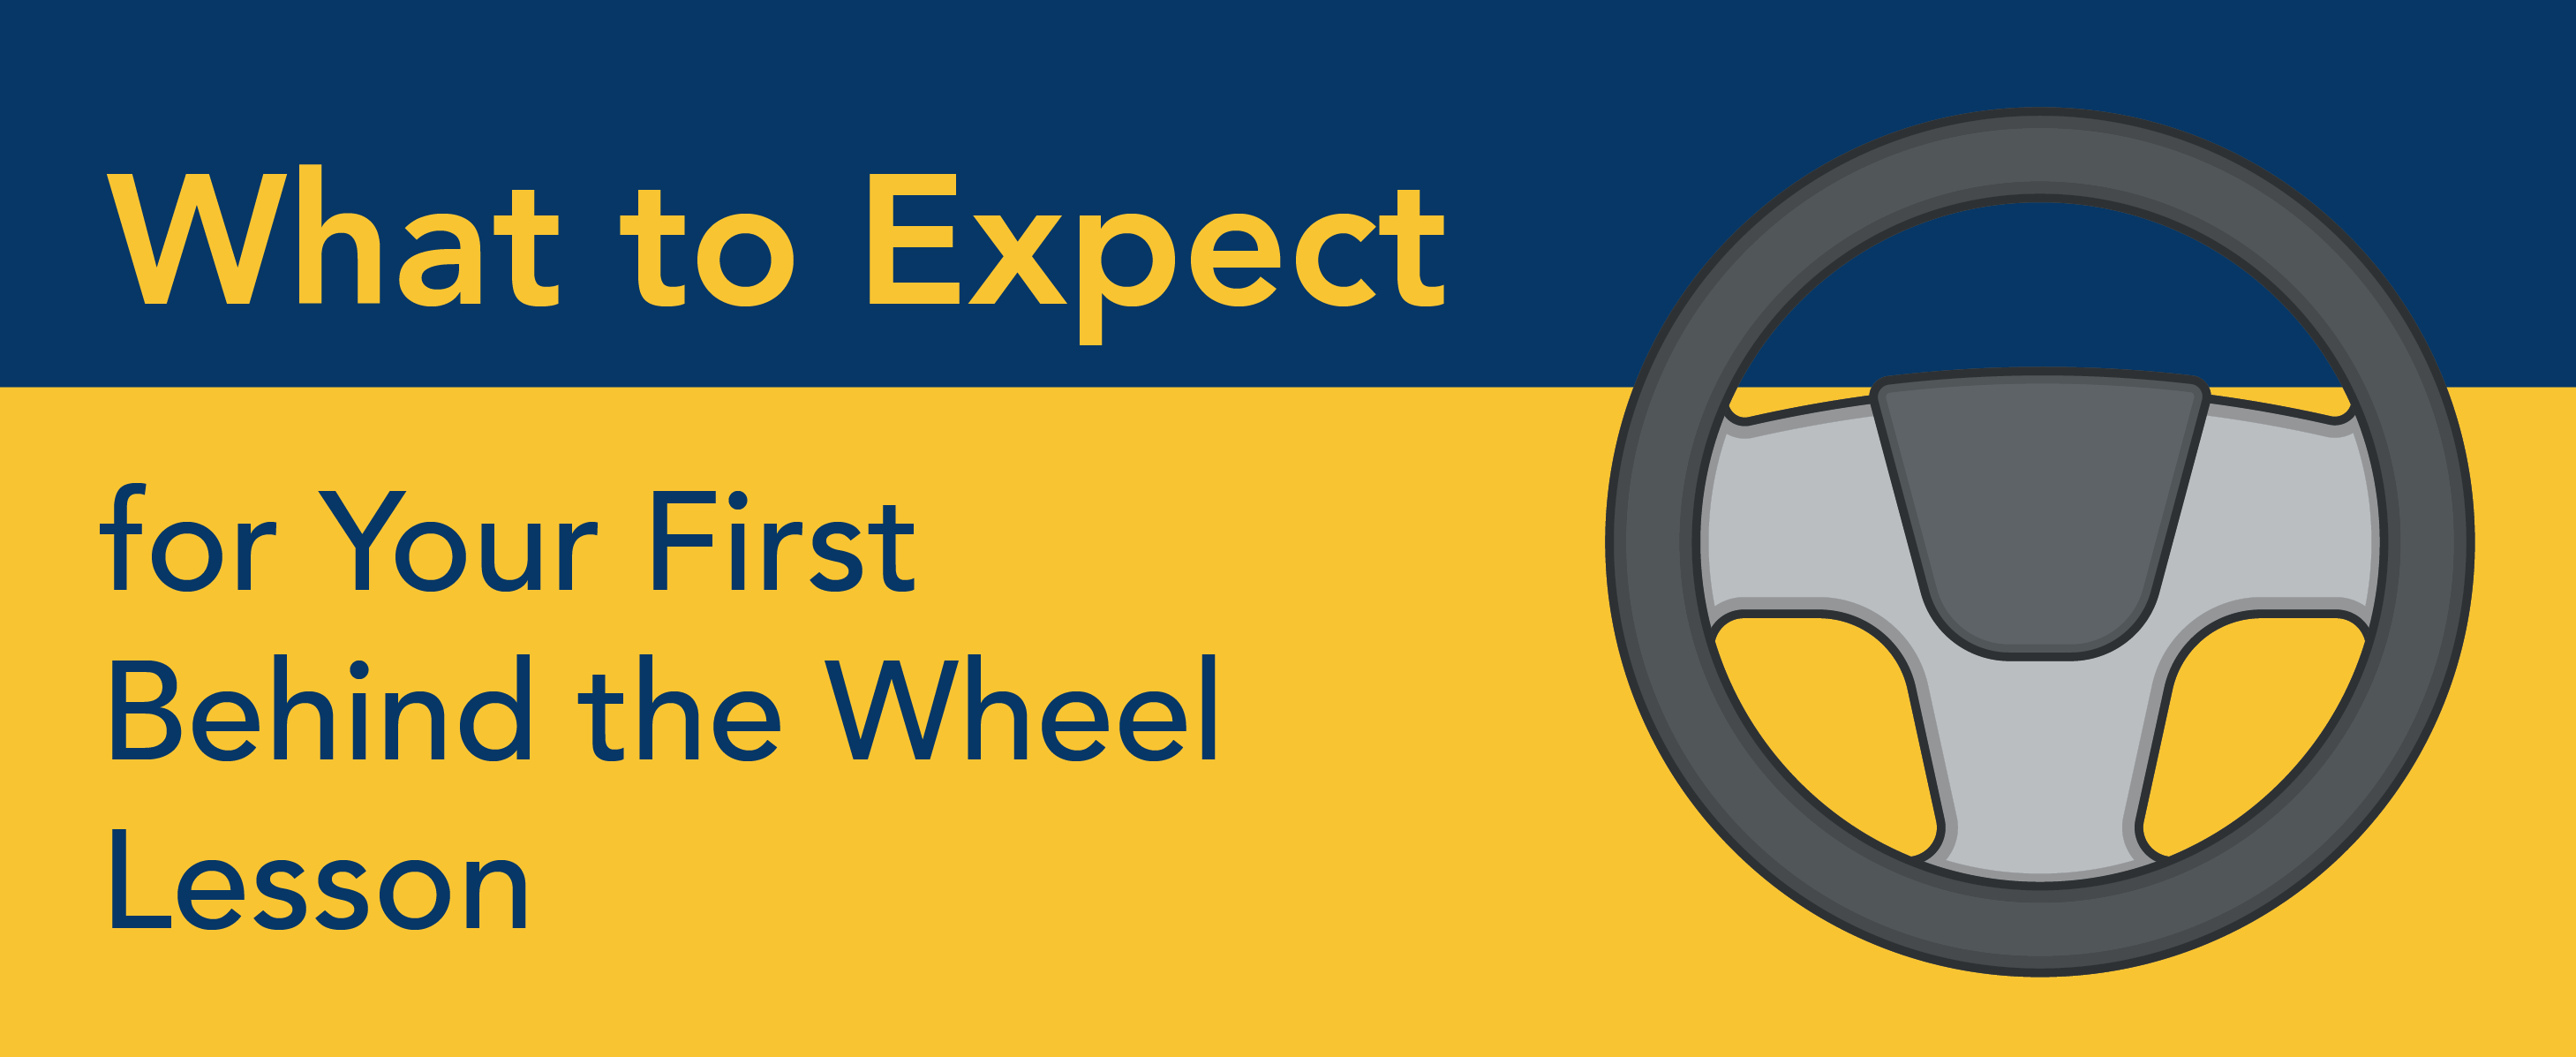 What to expect for your fist being the wheel lesson.